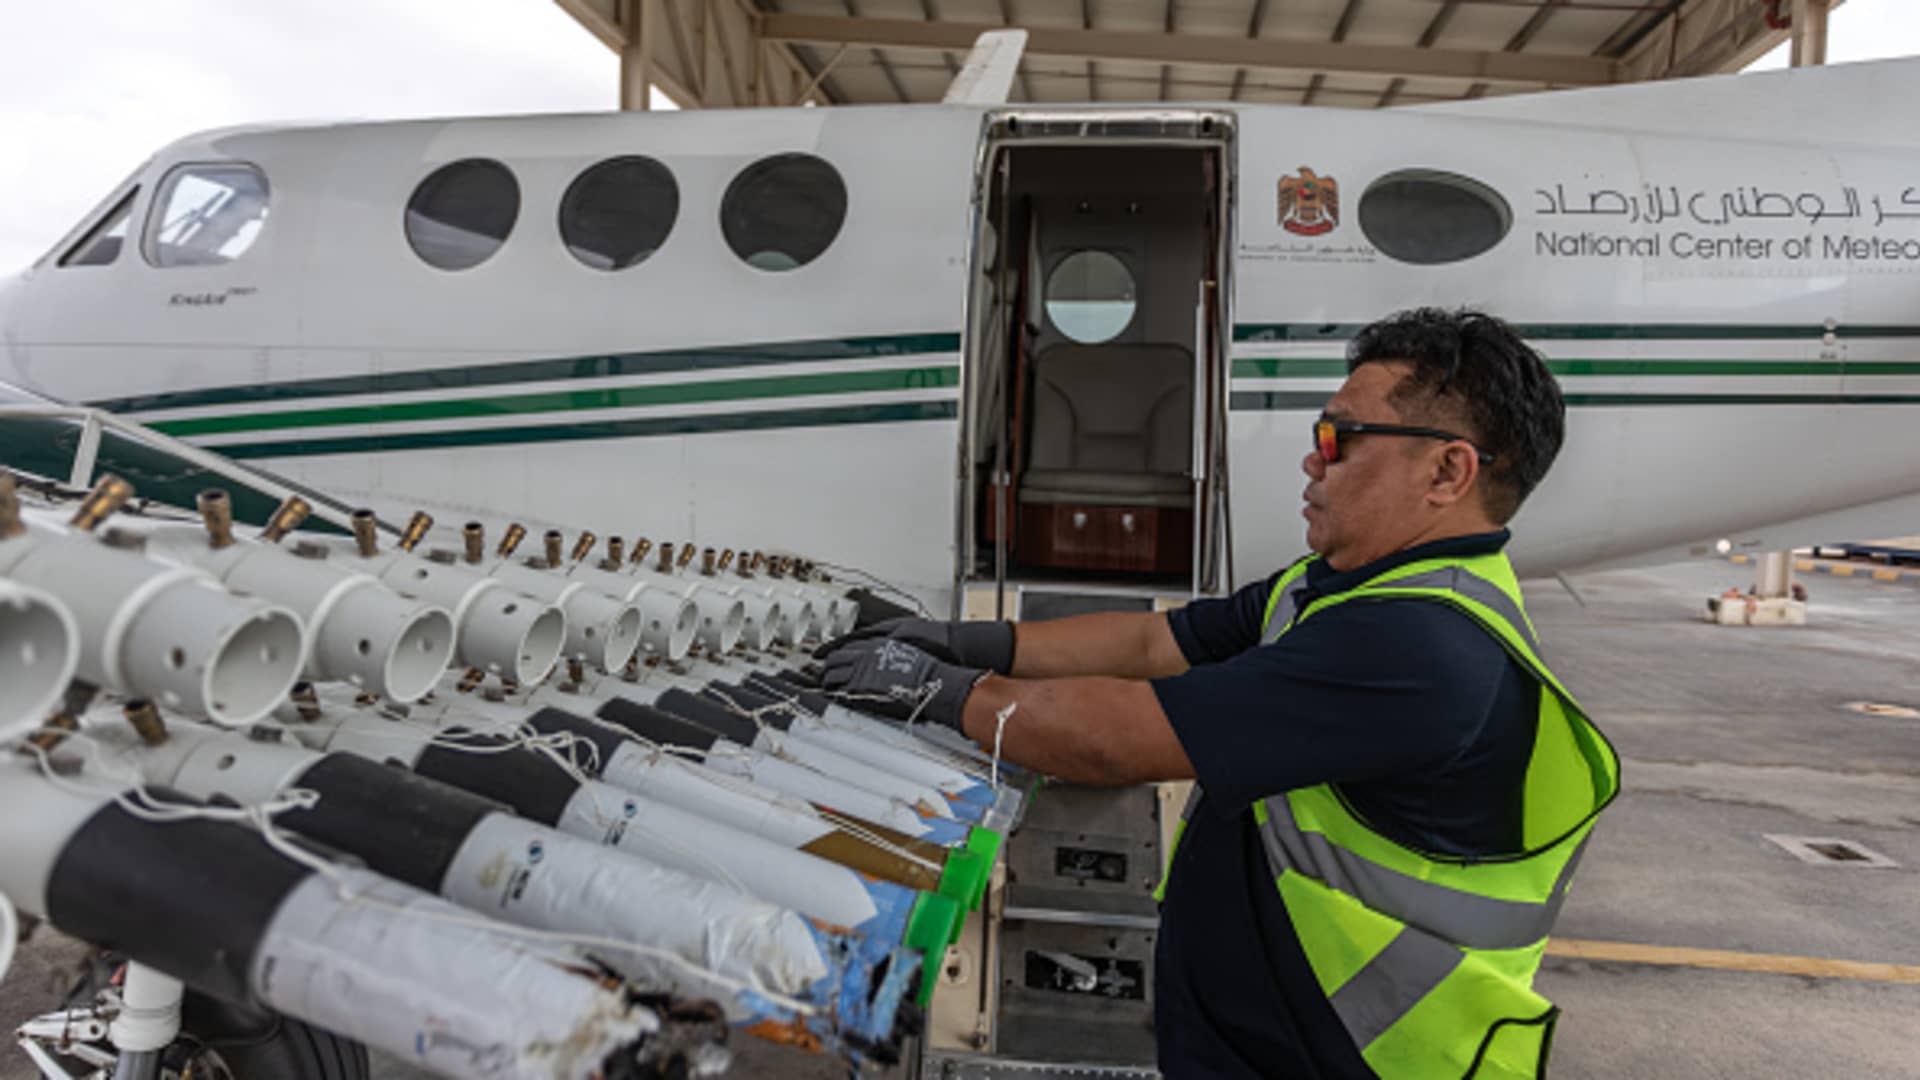 = A ground engineer restocking one of the UAE's National Center of Meteorology cloud-seeding planes with new Hygroscopic salt flares on January 31, 2024 in Al Ain, United Arab Emirates. 